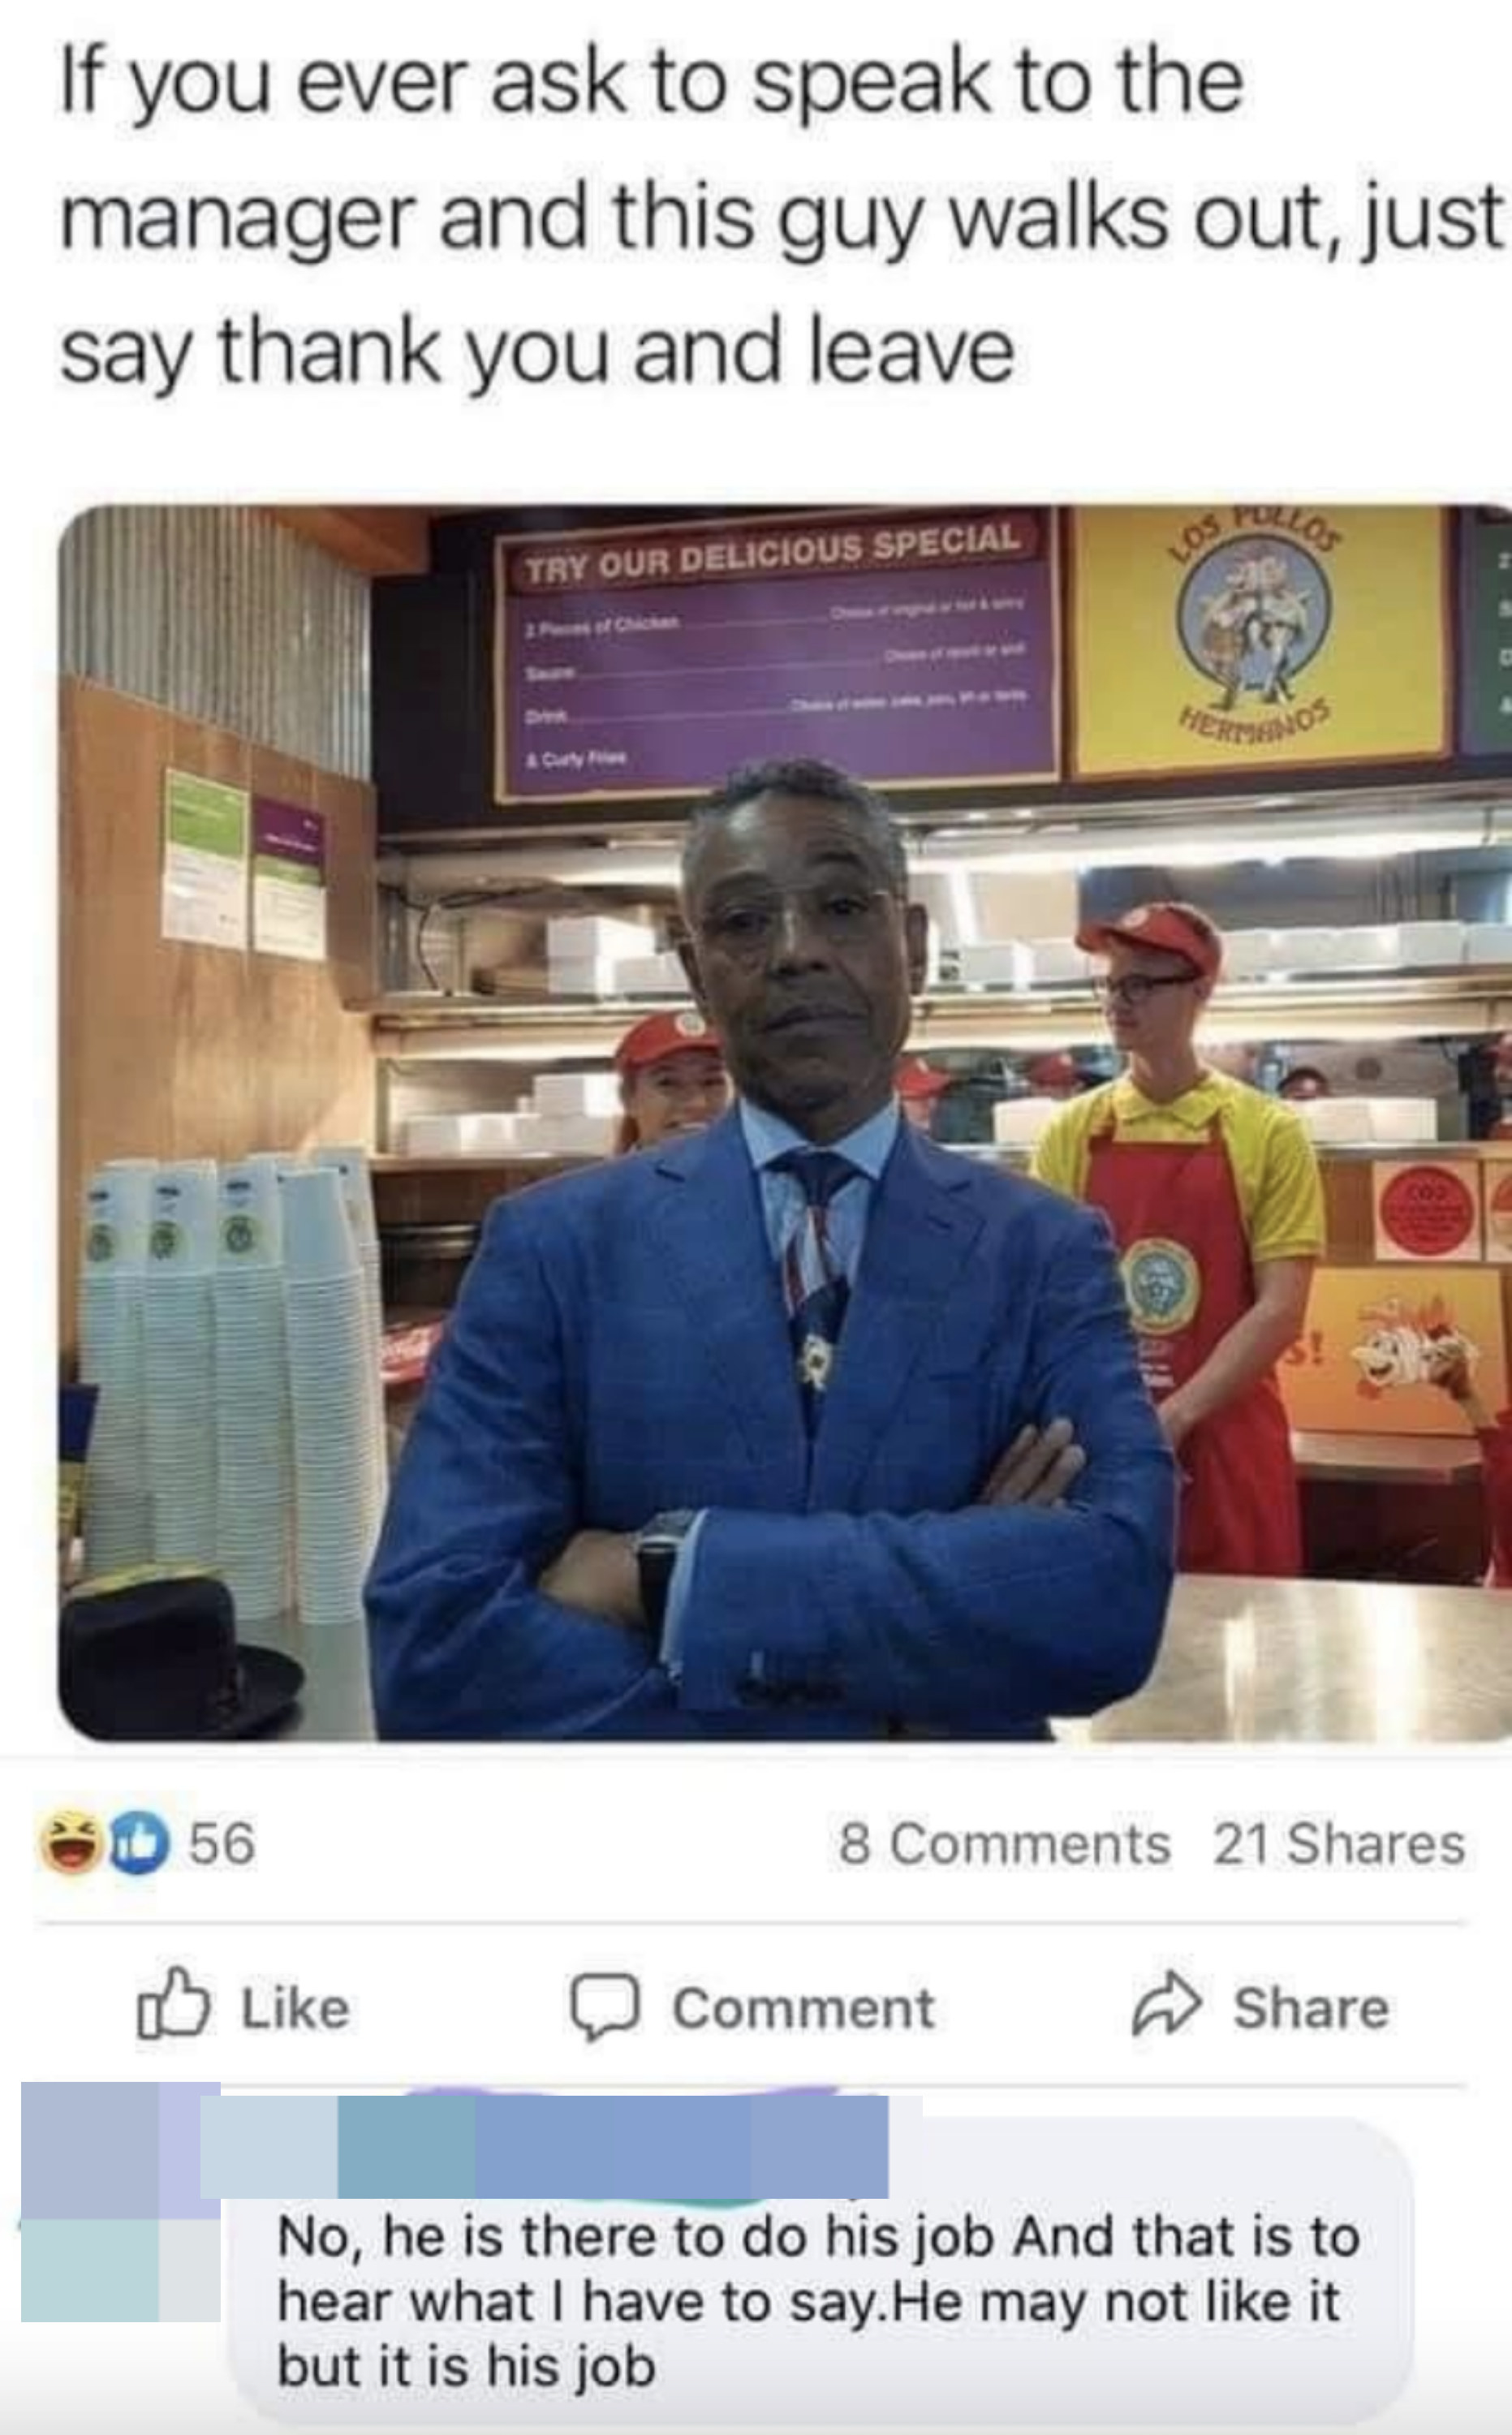 Meme of Gus from Breaking Bad standing at Los Pollos Hermanos counter with caption &quot;if u ask to speak to the manager and this guy walks out, just say thank u and leave,&quot; w/comment, &quot;No, he is there to do his job, and that is to hear what I have to say&quot;